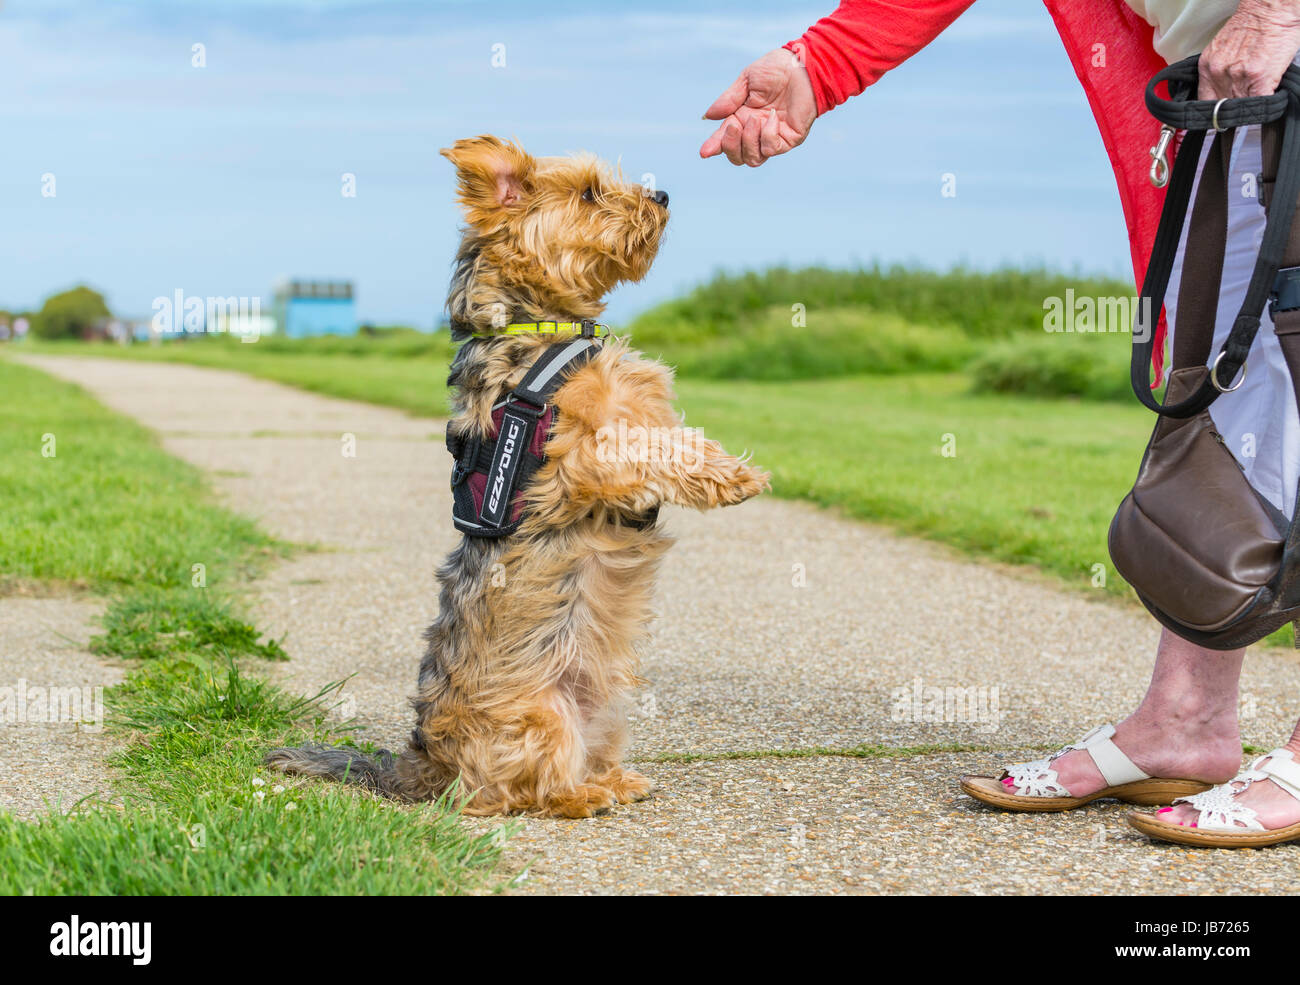 Dog on hind legs begging for treats. Yorkshire Terrier crossed with Border Collie dog awaiting food from owner. Dog begging for treat. Stock Photo